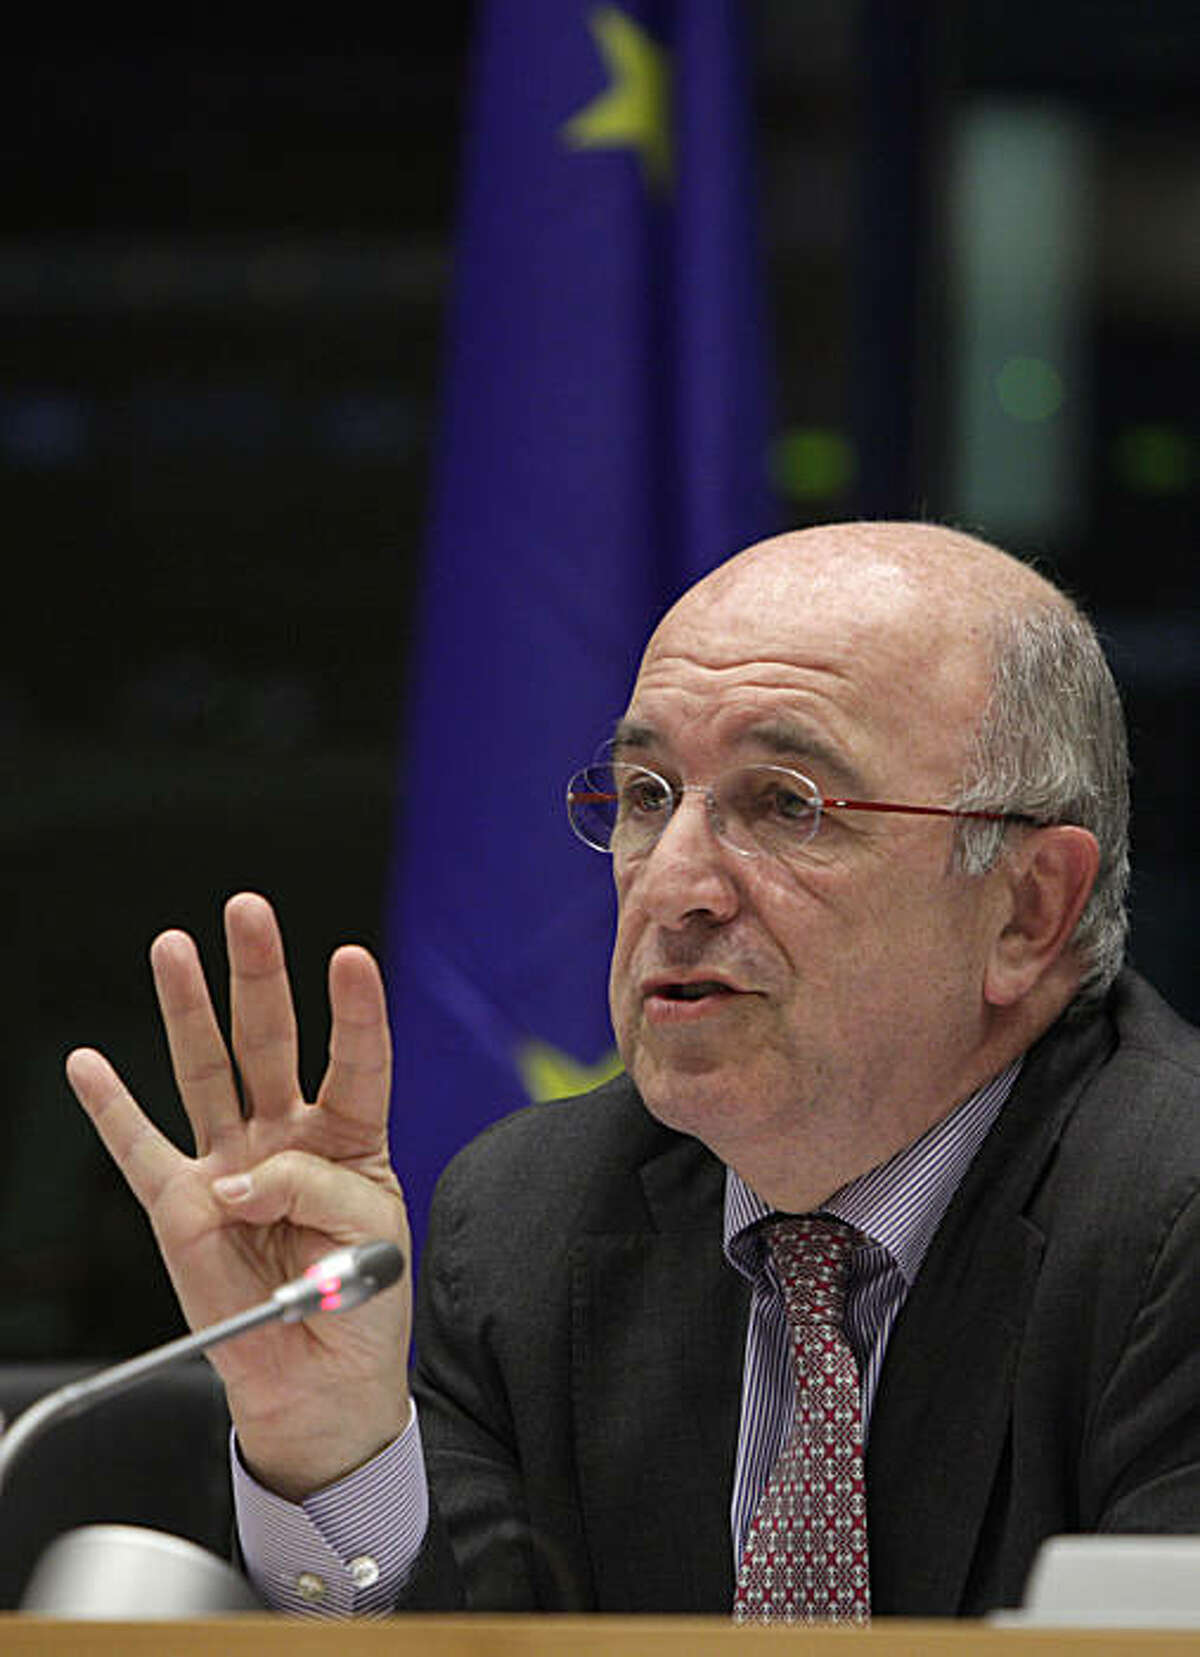 European Commissioner for Competition Joaquin Almunia gestures while speaking during a session at the European Parliament in Brussels on Tuesday, Nov. 30, 2010. The European Commission said it is launching a formal investigation into whether Google has abused its dominant market position in online searches. The EU's competition watchdog Joaquin Almunia said that the probe follows complaints from other online search providers that Google put them at a disadvantage in both its paid and unpaid search results.